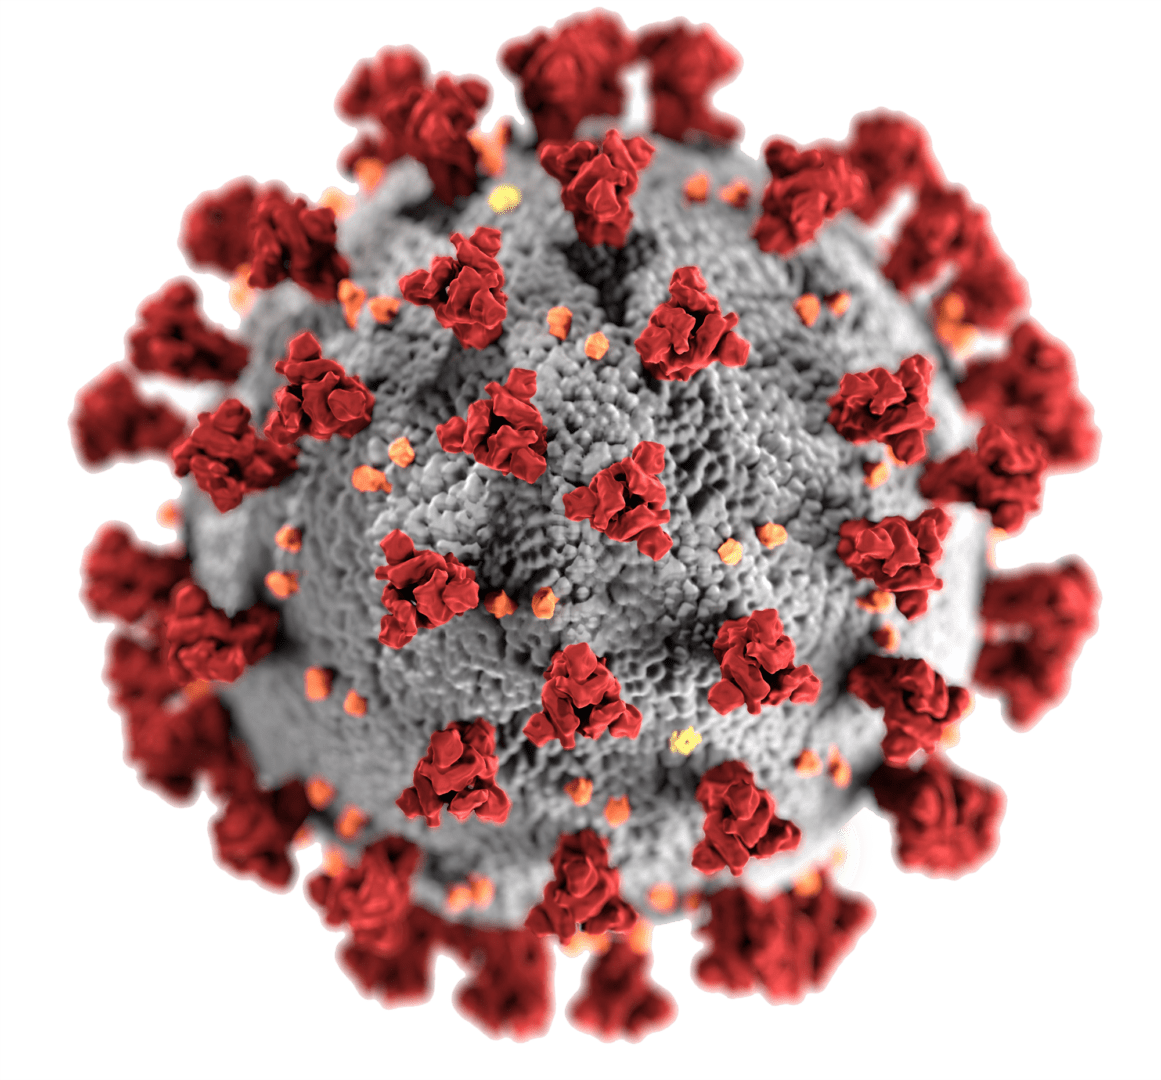 A red coronavirus on a green background, surrounded by bugs in cyberspace.